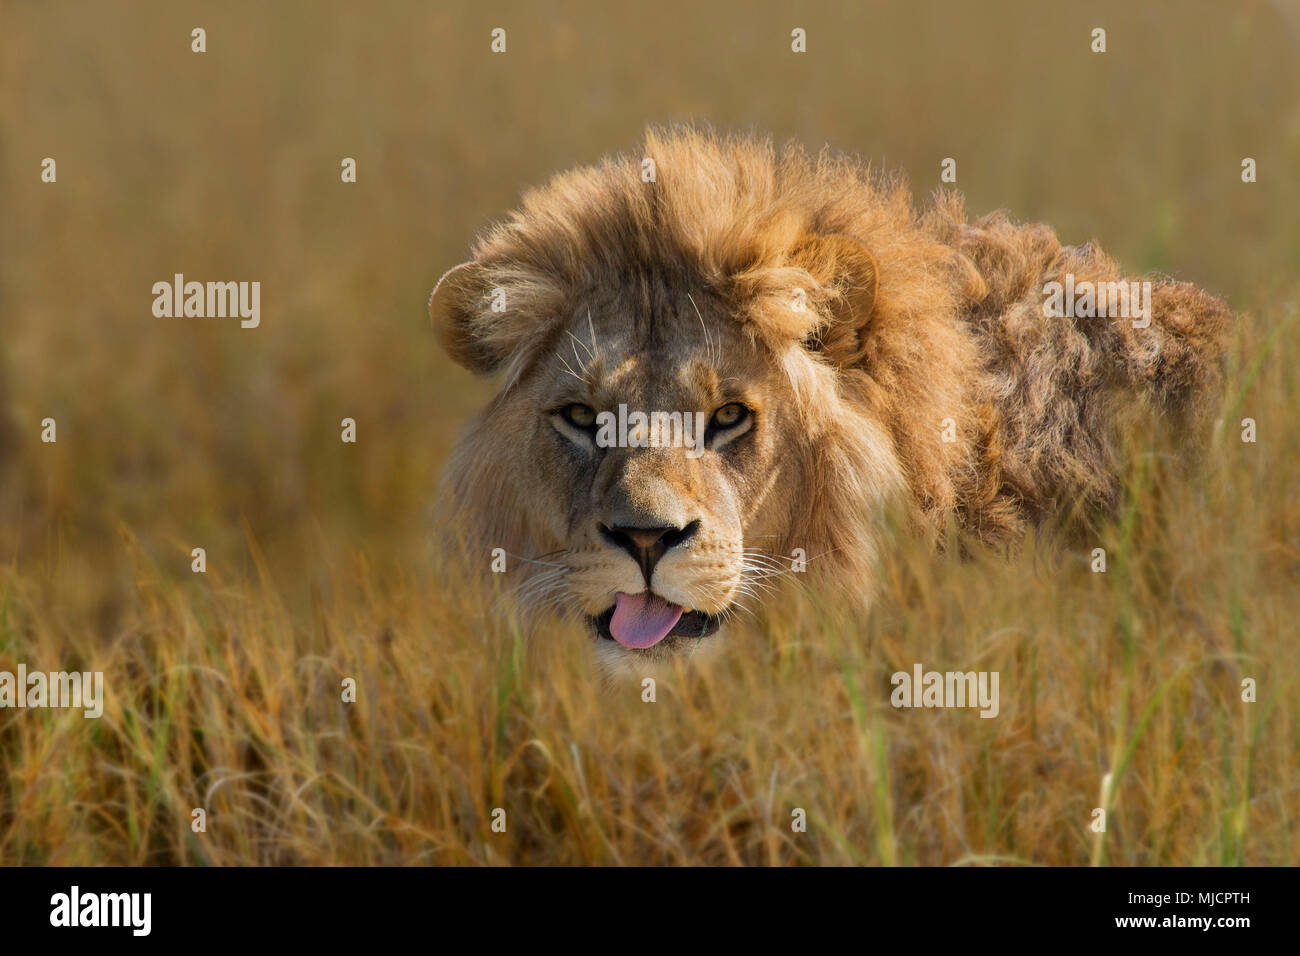 male lions slink through the grass, Panthera leo, Africa Stock Photo